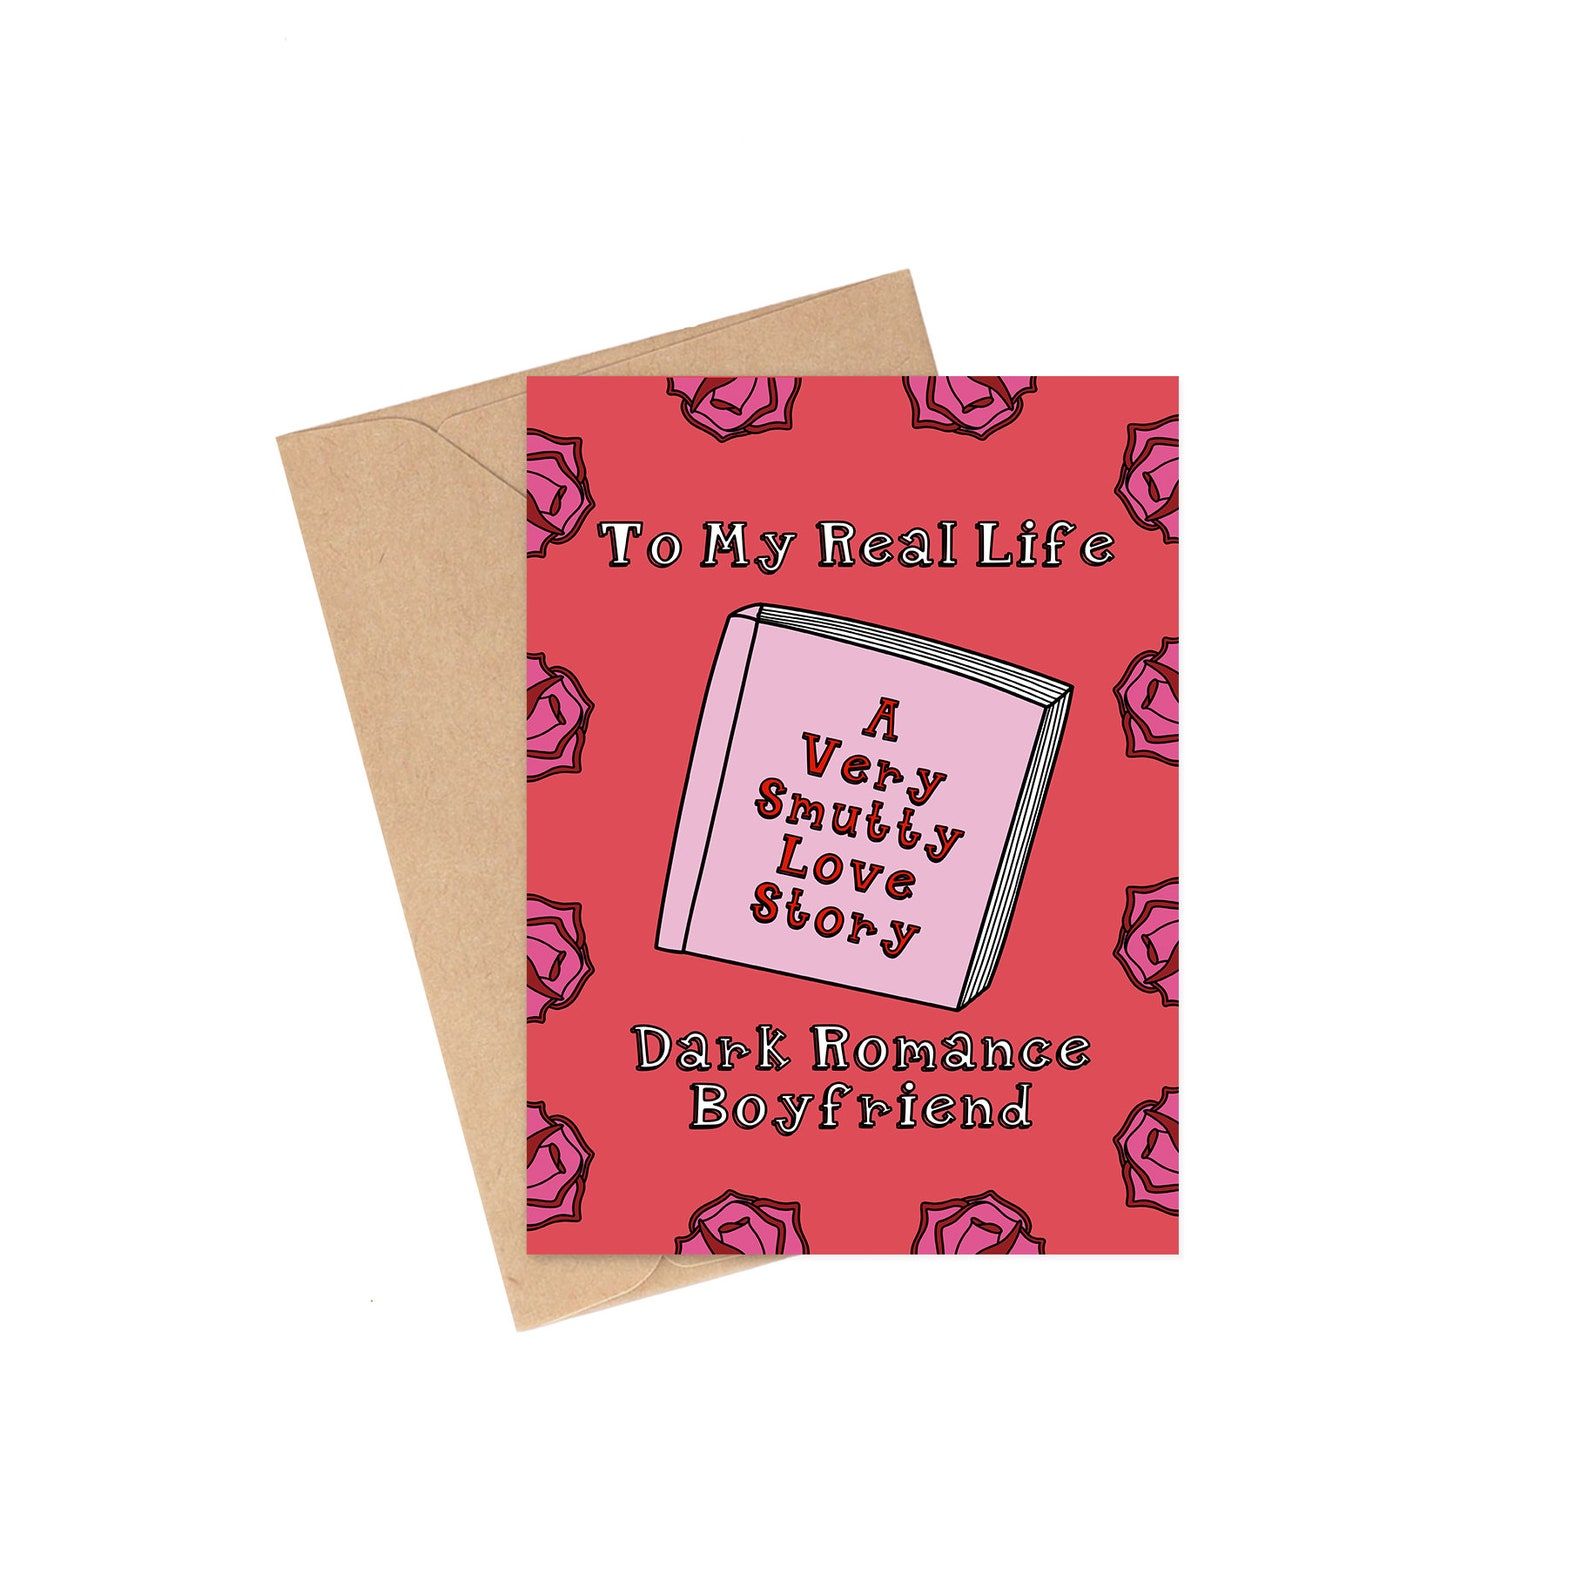 a red card with a pink book that reads "A very smutty love story" and the message "To my real life dark romance boyfriend"